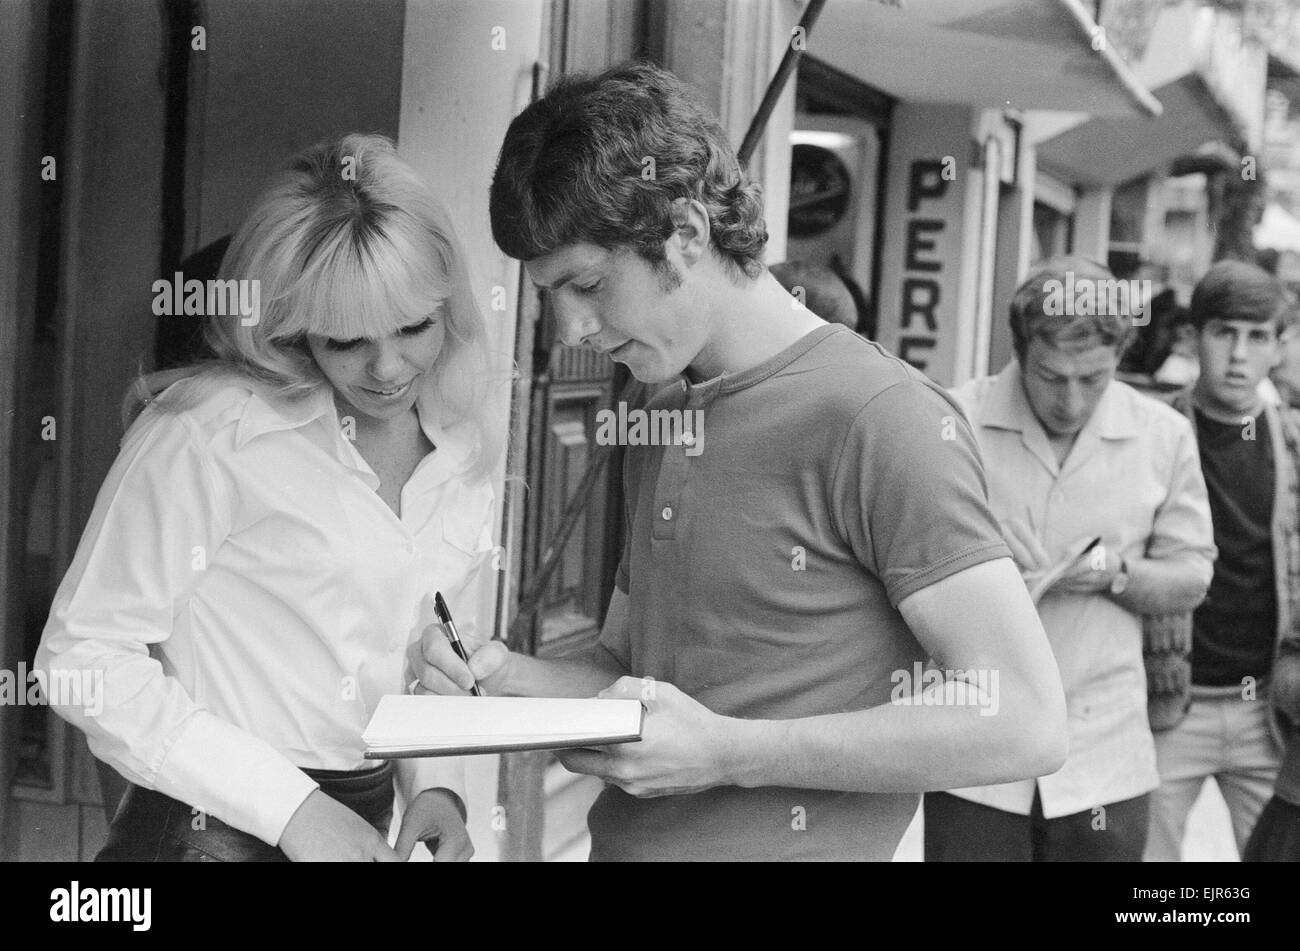 1970 World Cup Finals in Mexico. England footballer Brian Kidd signs an autograph for a woman as the team stroll around the Zona Rosa part of Mexico City during their shopping trip there. 11th May 1970. Stock Photo